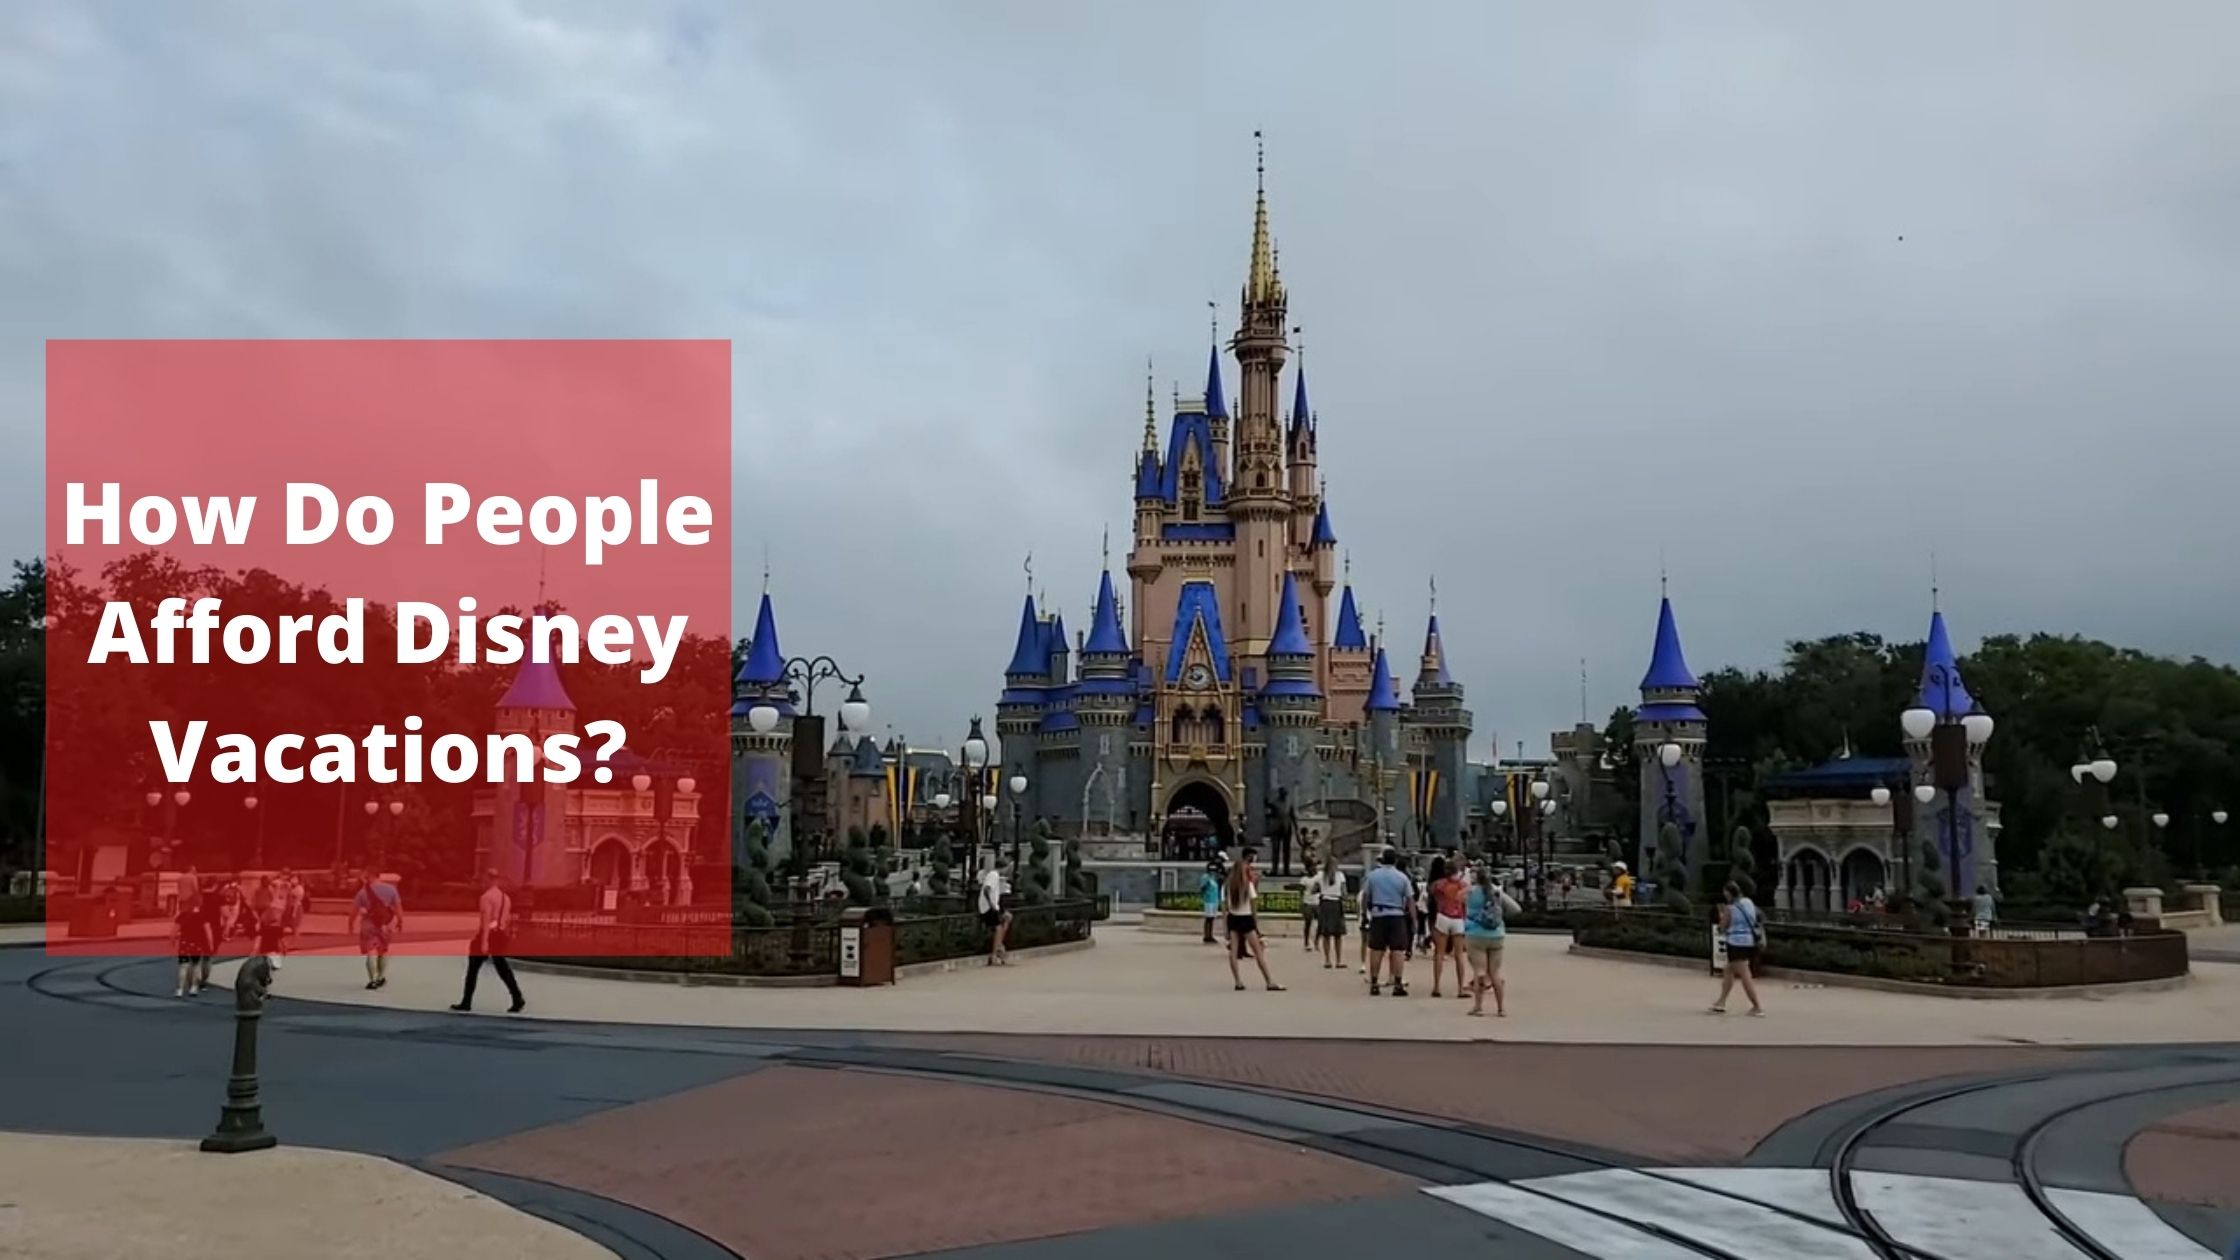 How Do People Afford Disney Vacations